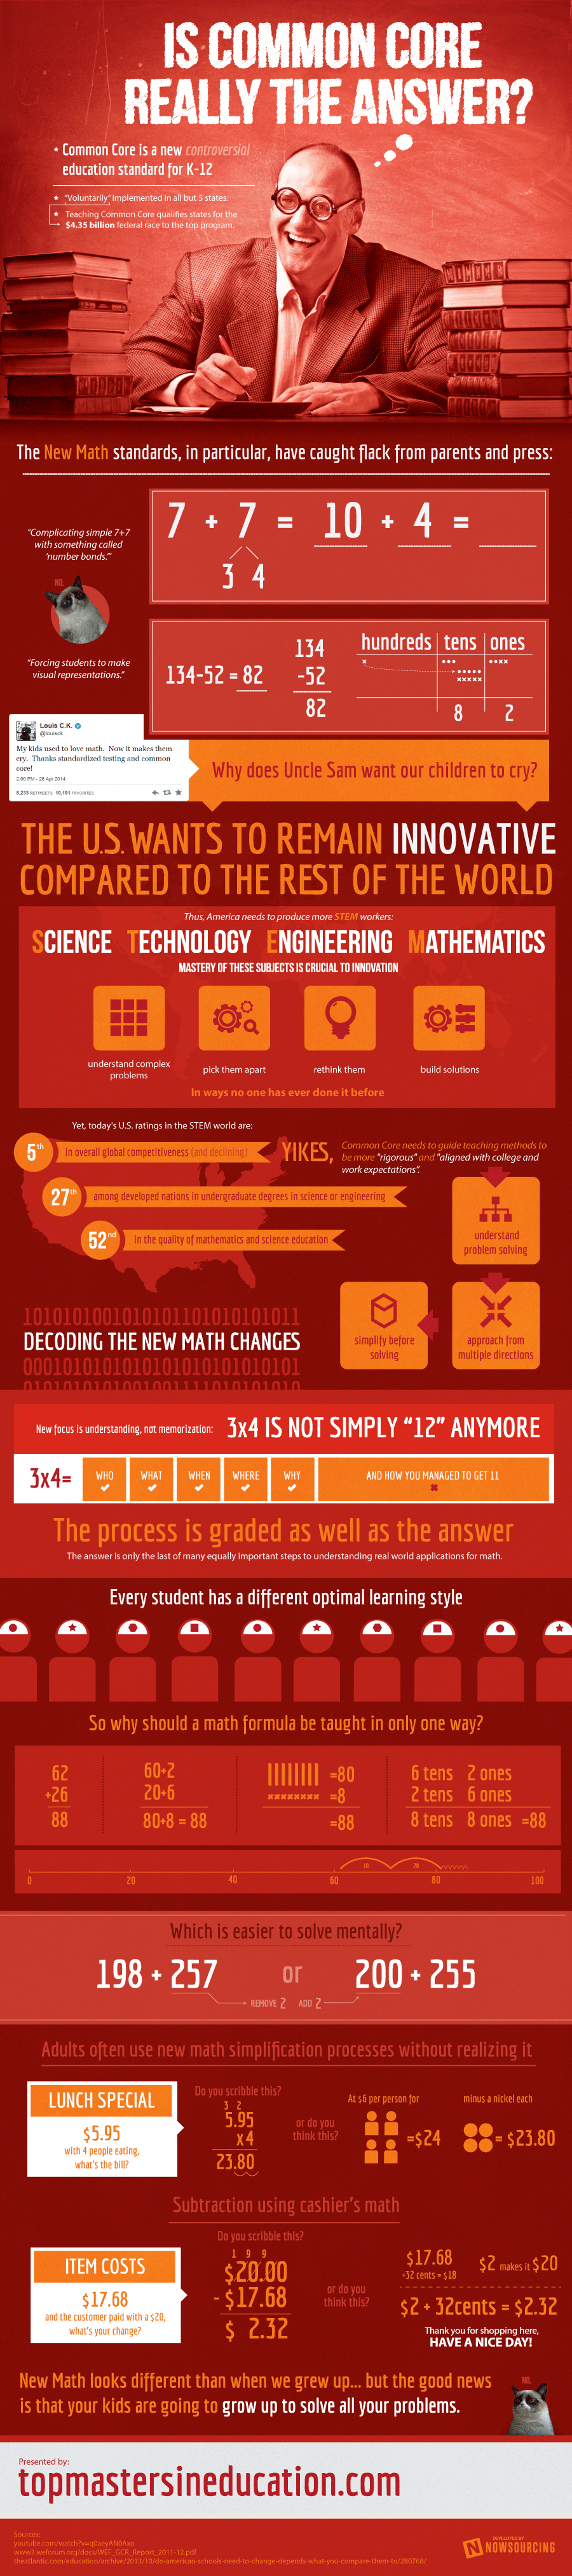 Is Common Core Really the Answer? Infographic